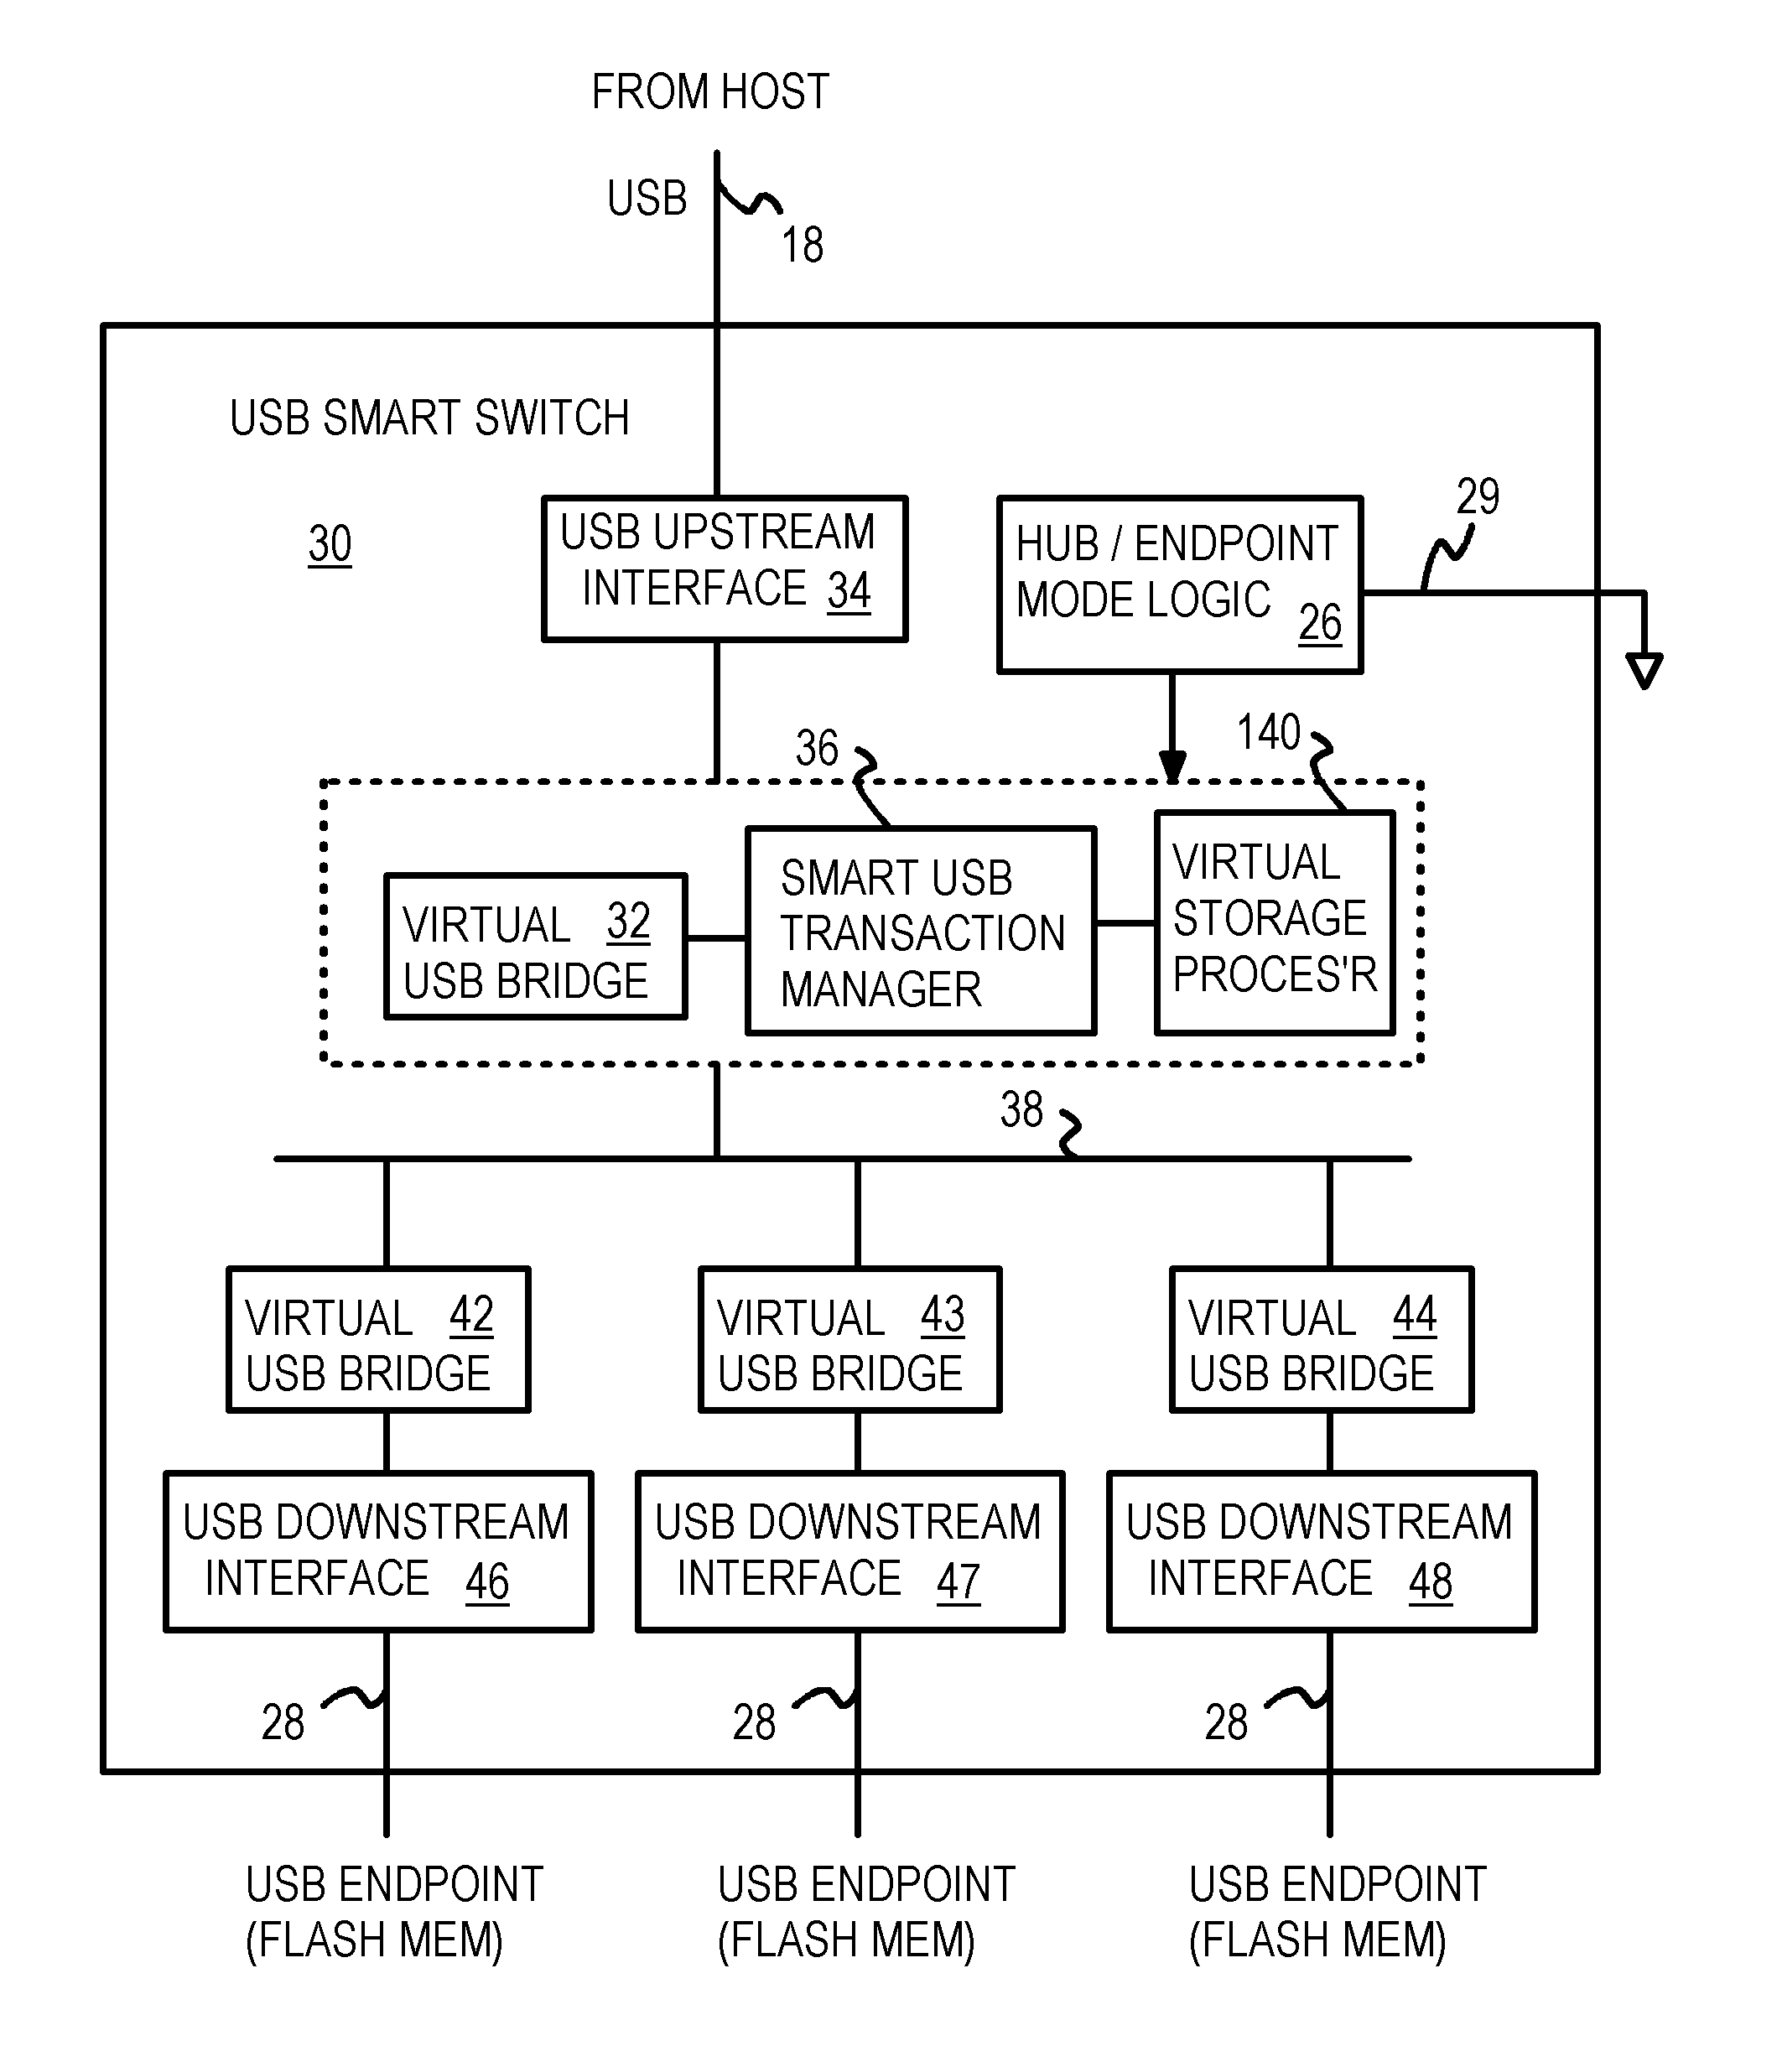 USB smart switch with packet re-ordering for interleaving among multiple flash-memory endpoints aggregated as a single virtual USB endpoint